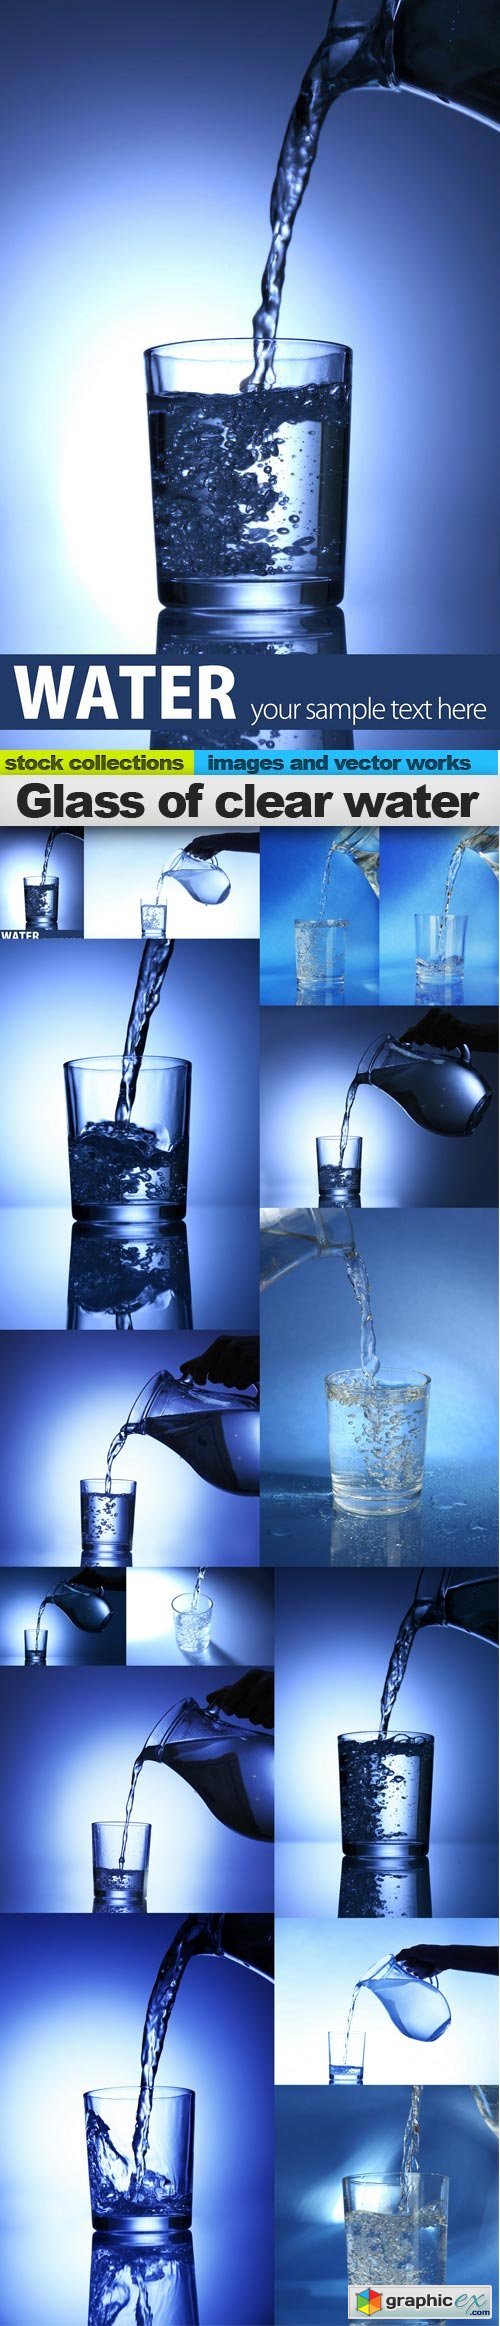 Glass of clear water, 15 x UHQ JPEG